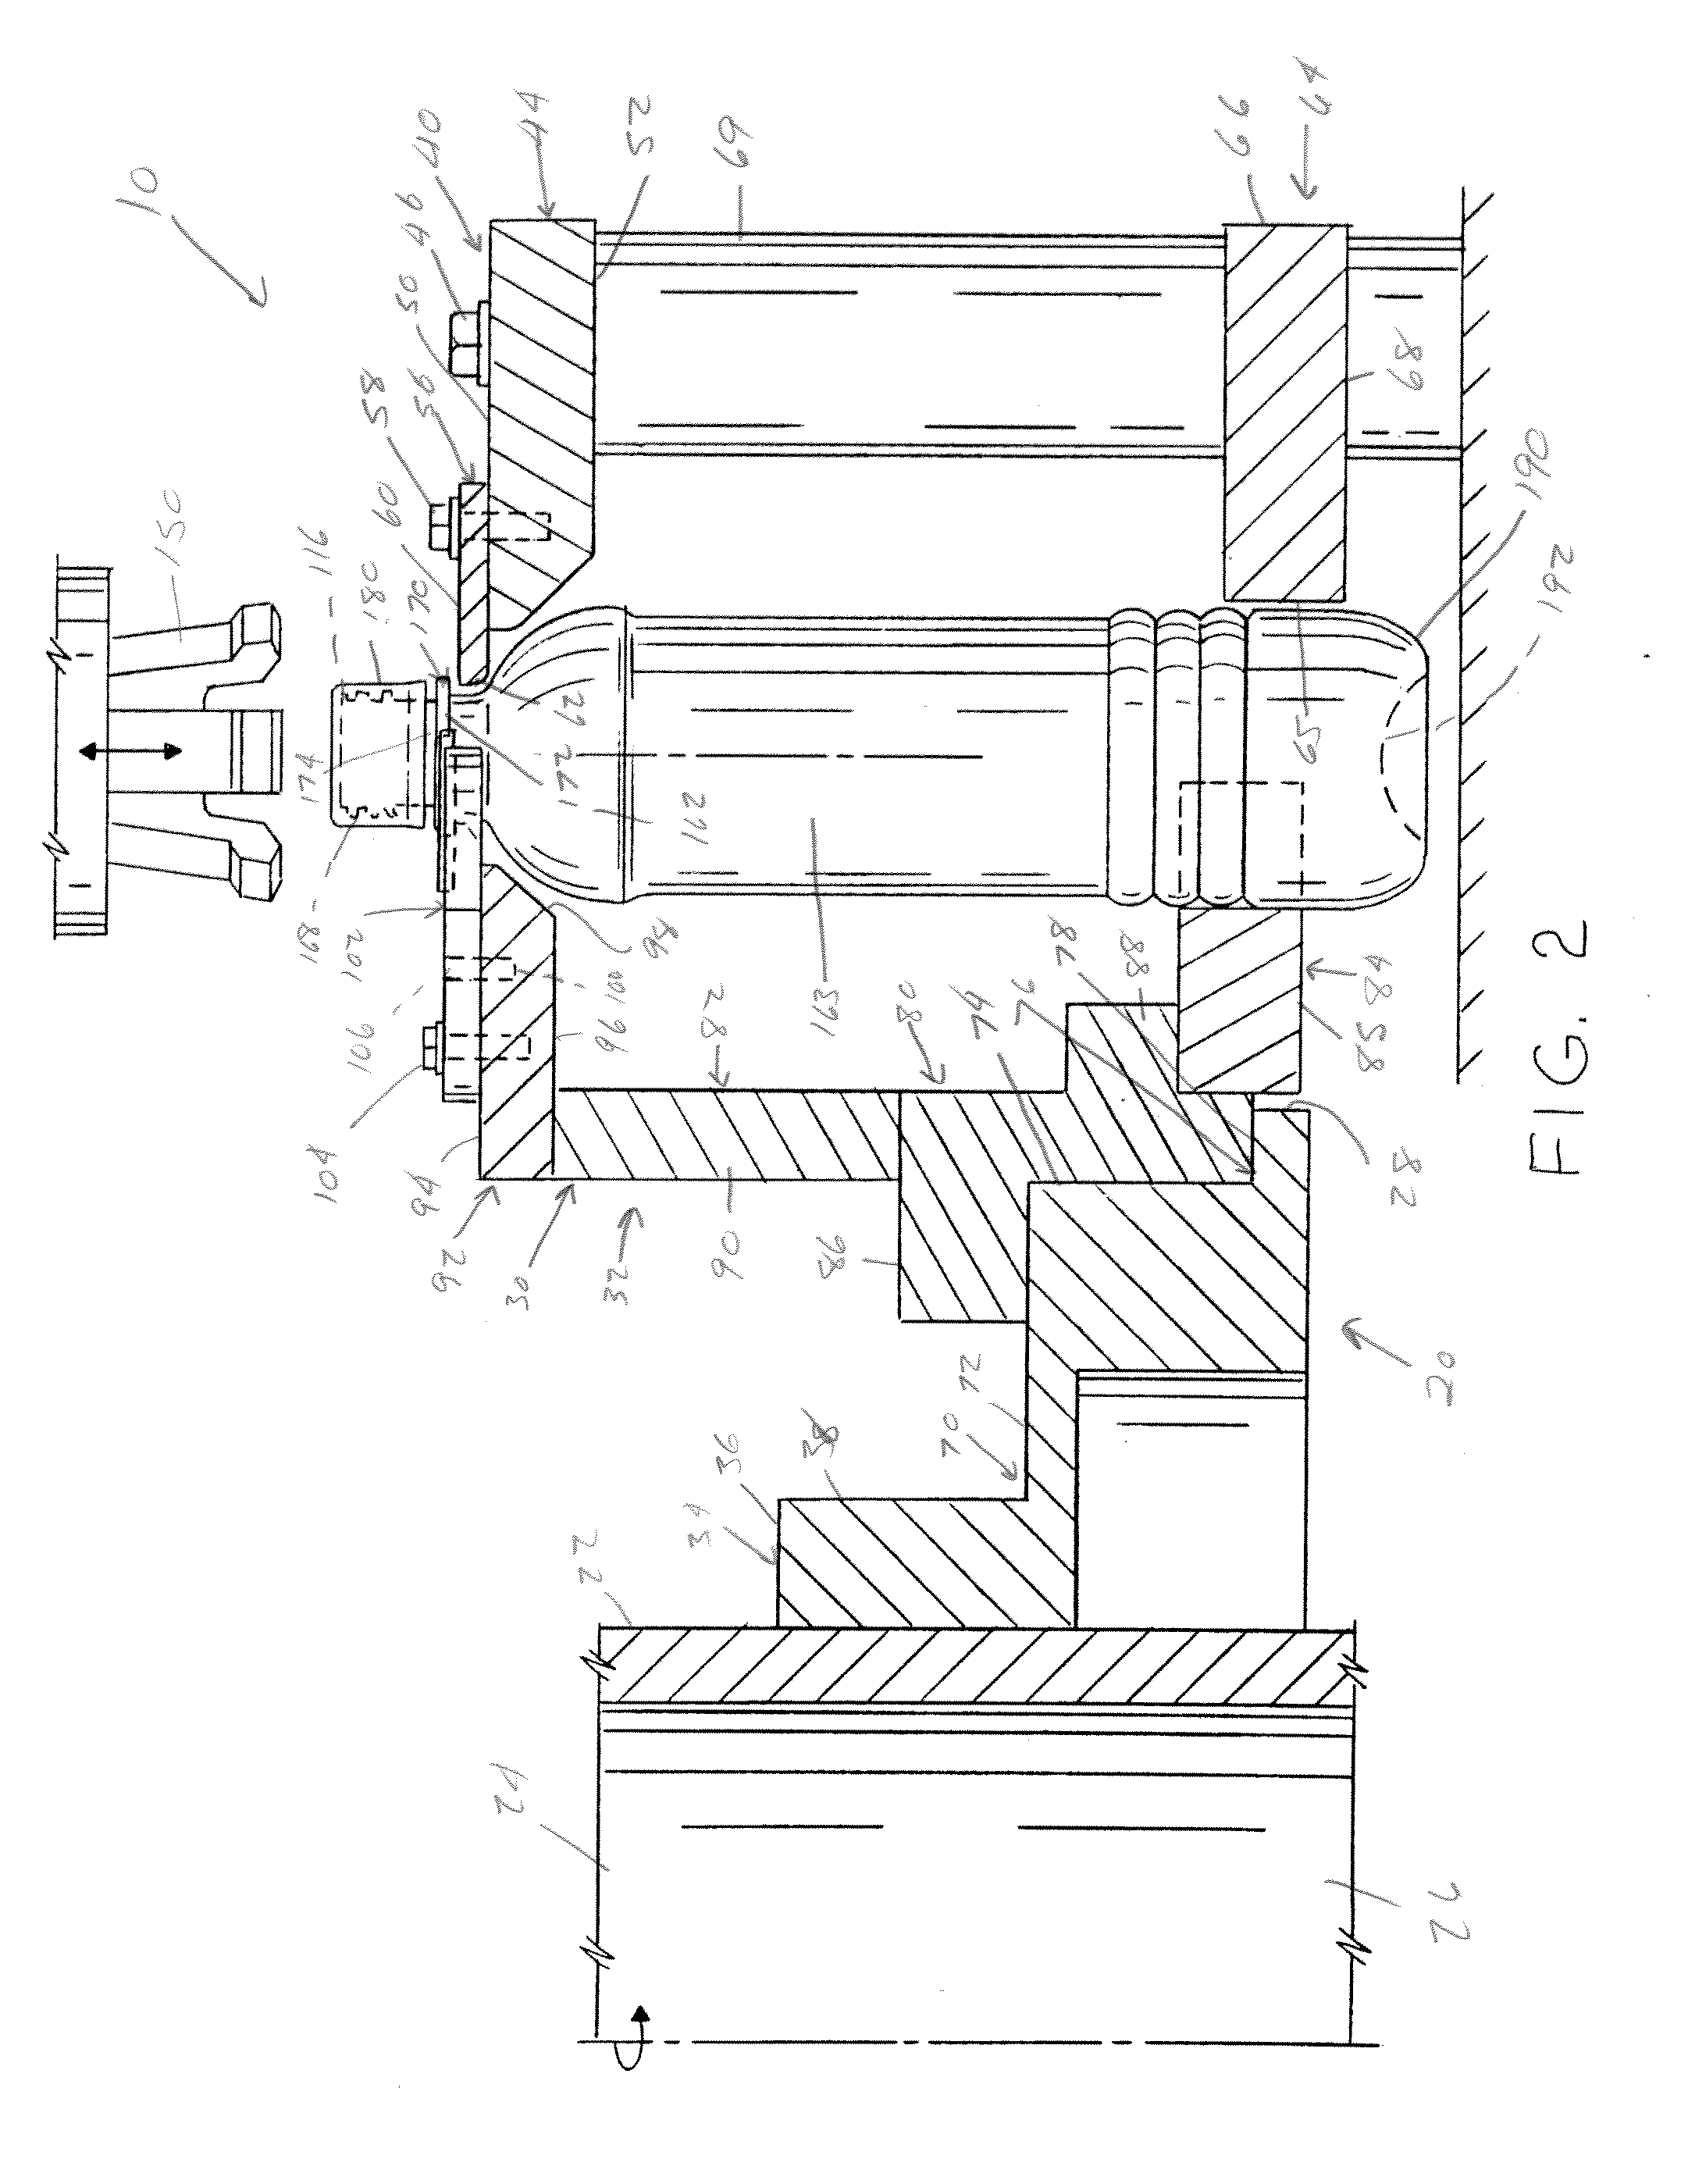 Apparatus and method to prevent bottle rotation